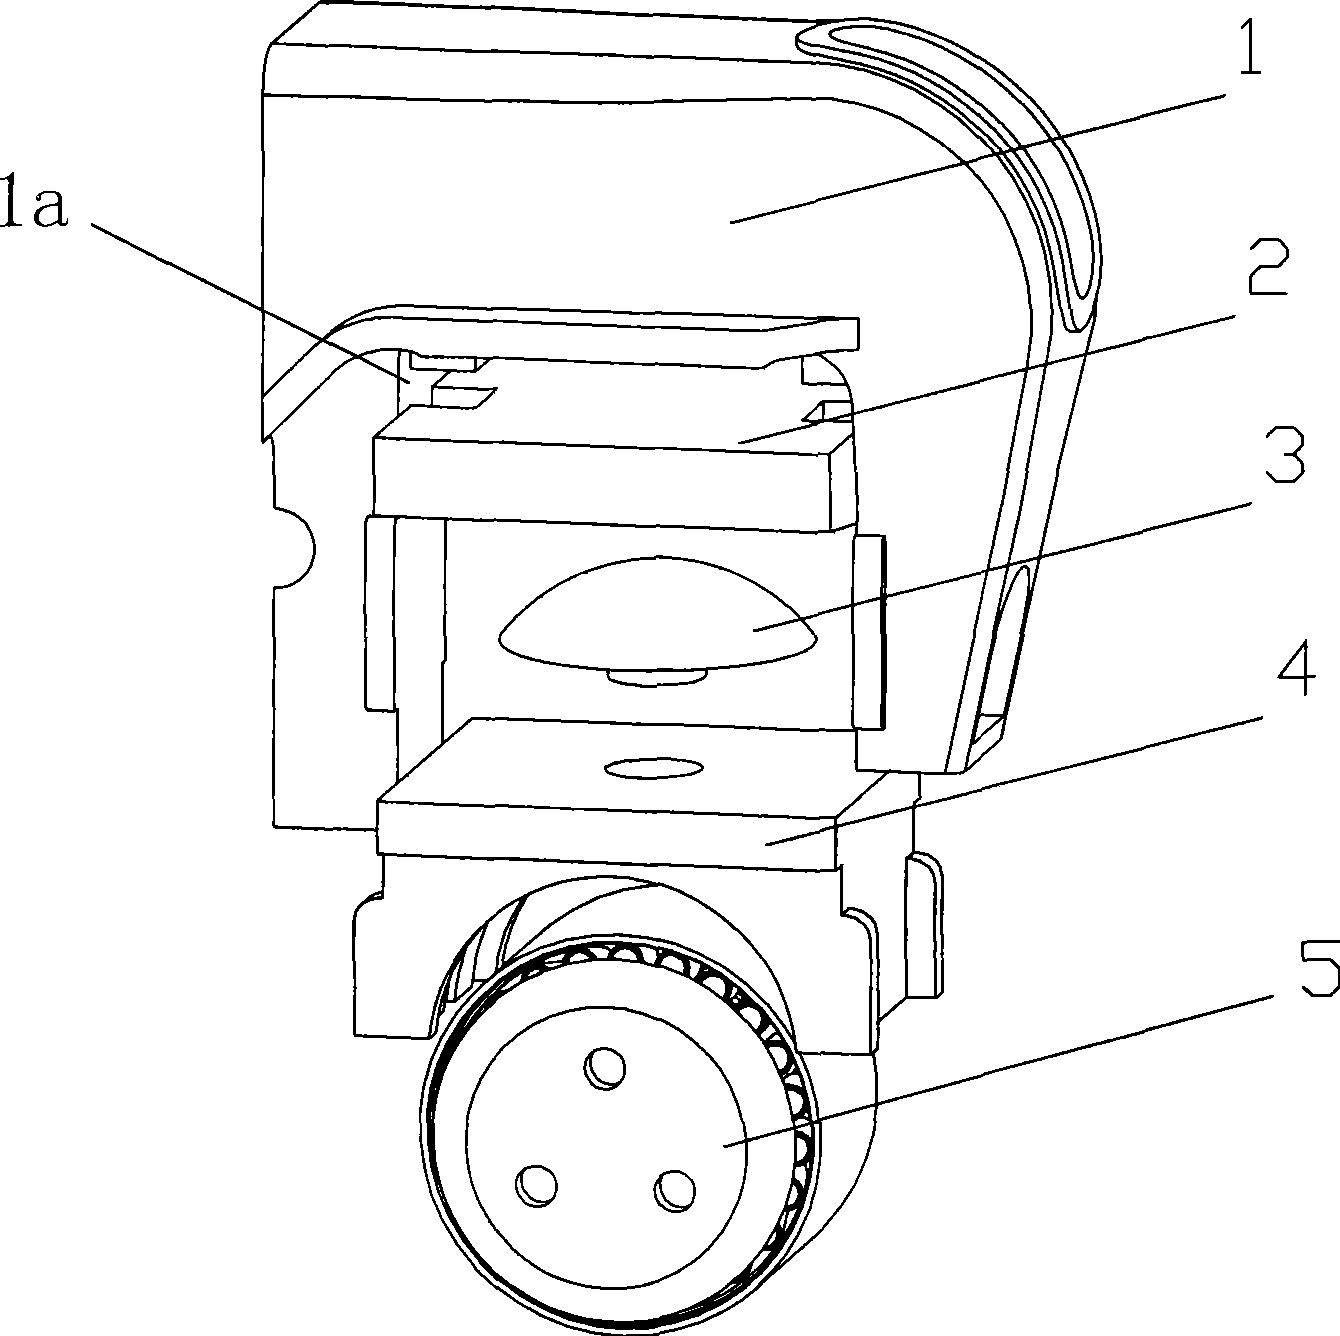 Auxiliary bearing saddle assembly for spherical cap of pendulum goods train